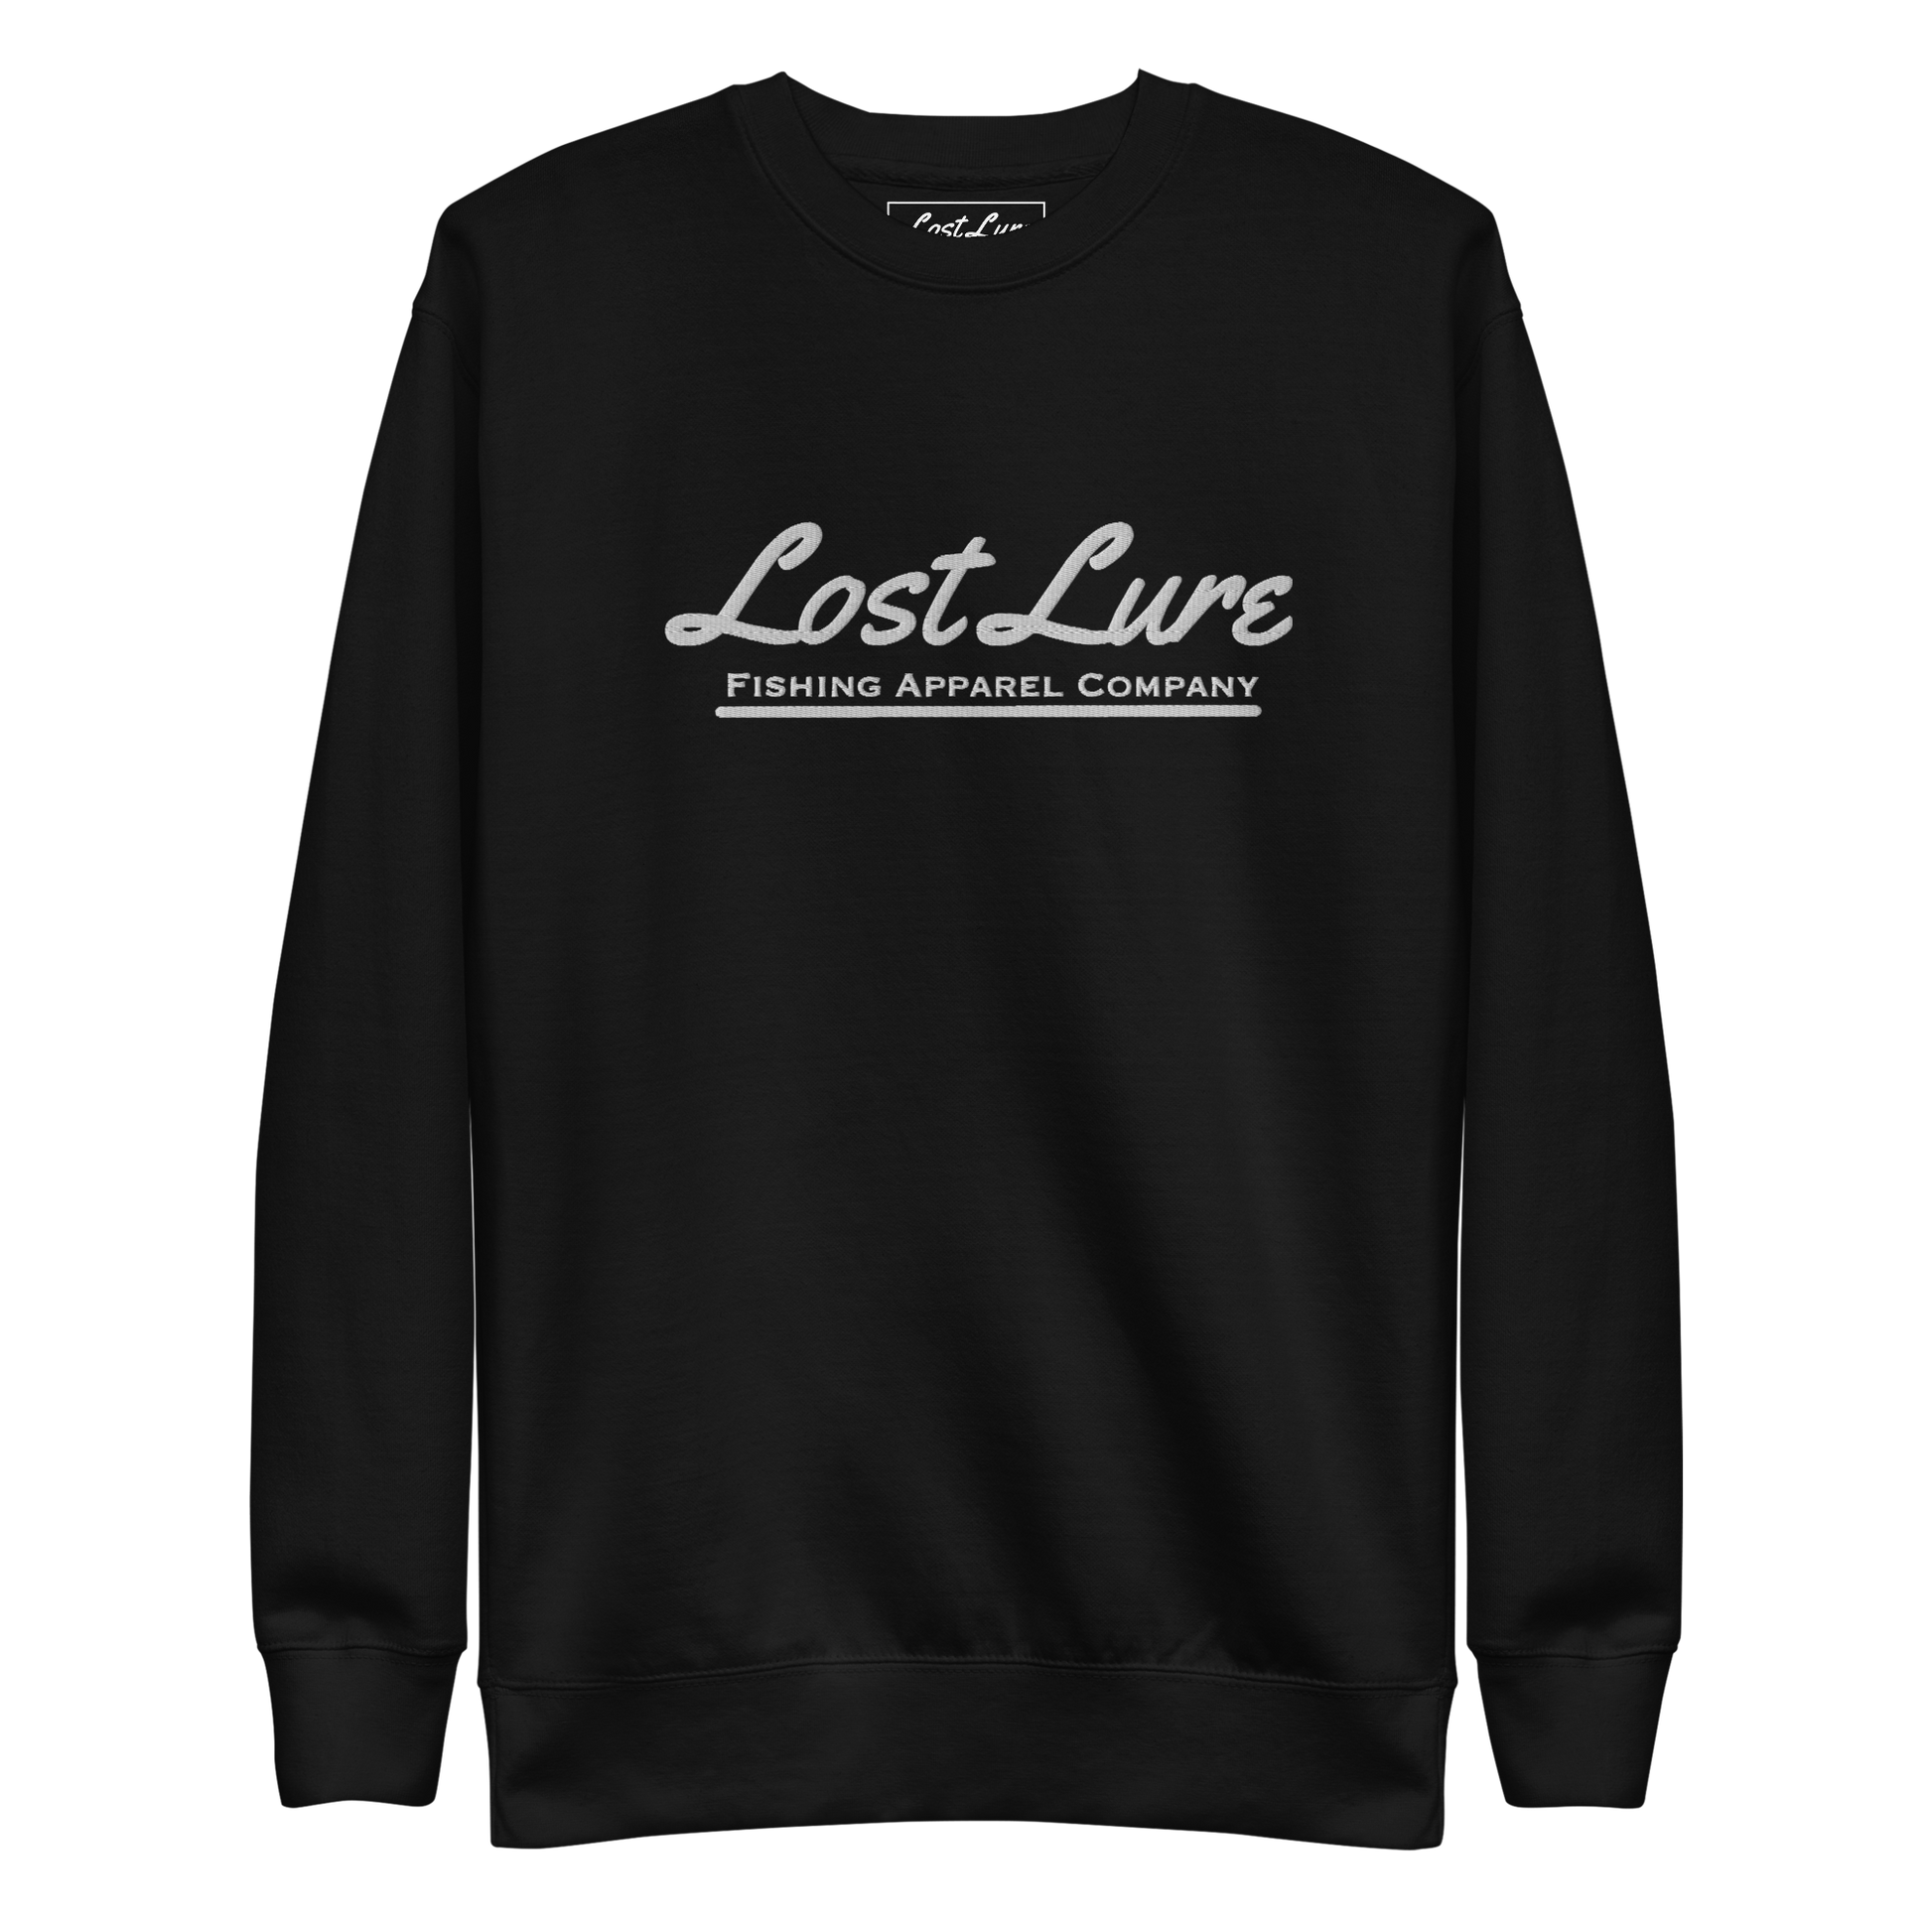 Black and lost lure embroidered fishing pullover / sweatshirt.